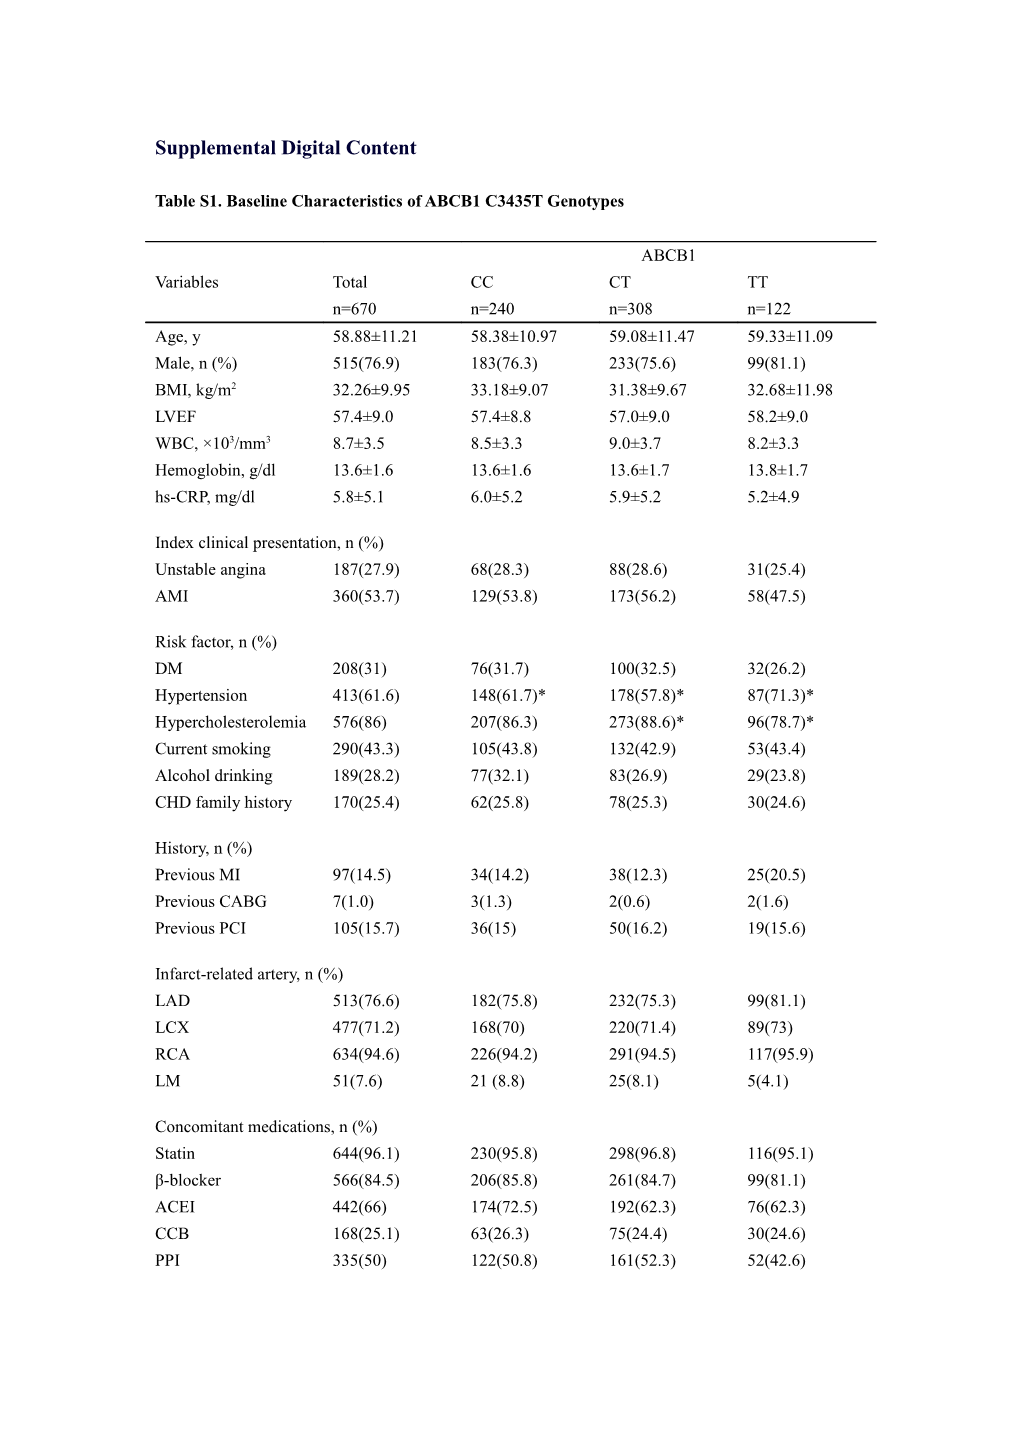 Table S1. Baseline Characteristics of ABCB1 C3435T Genotypes